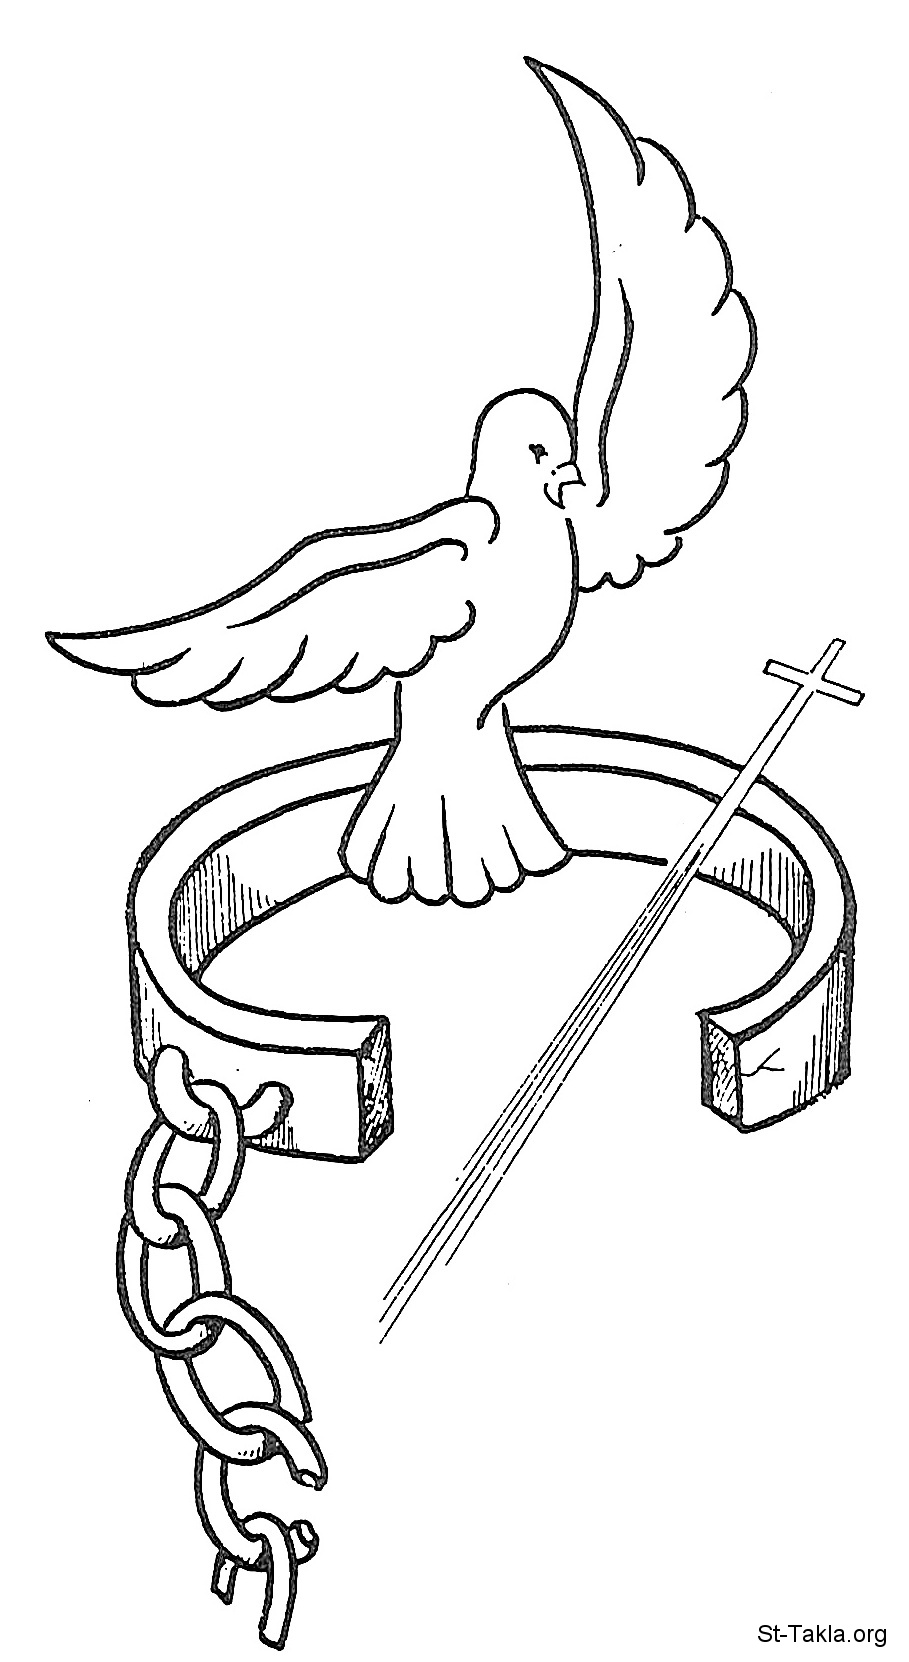 St-Takla.org Image: Free dove, freedom from shackles and cuffs through the Holy Cross     :  ɡ      